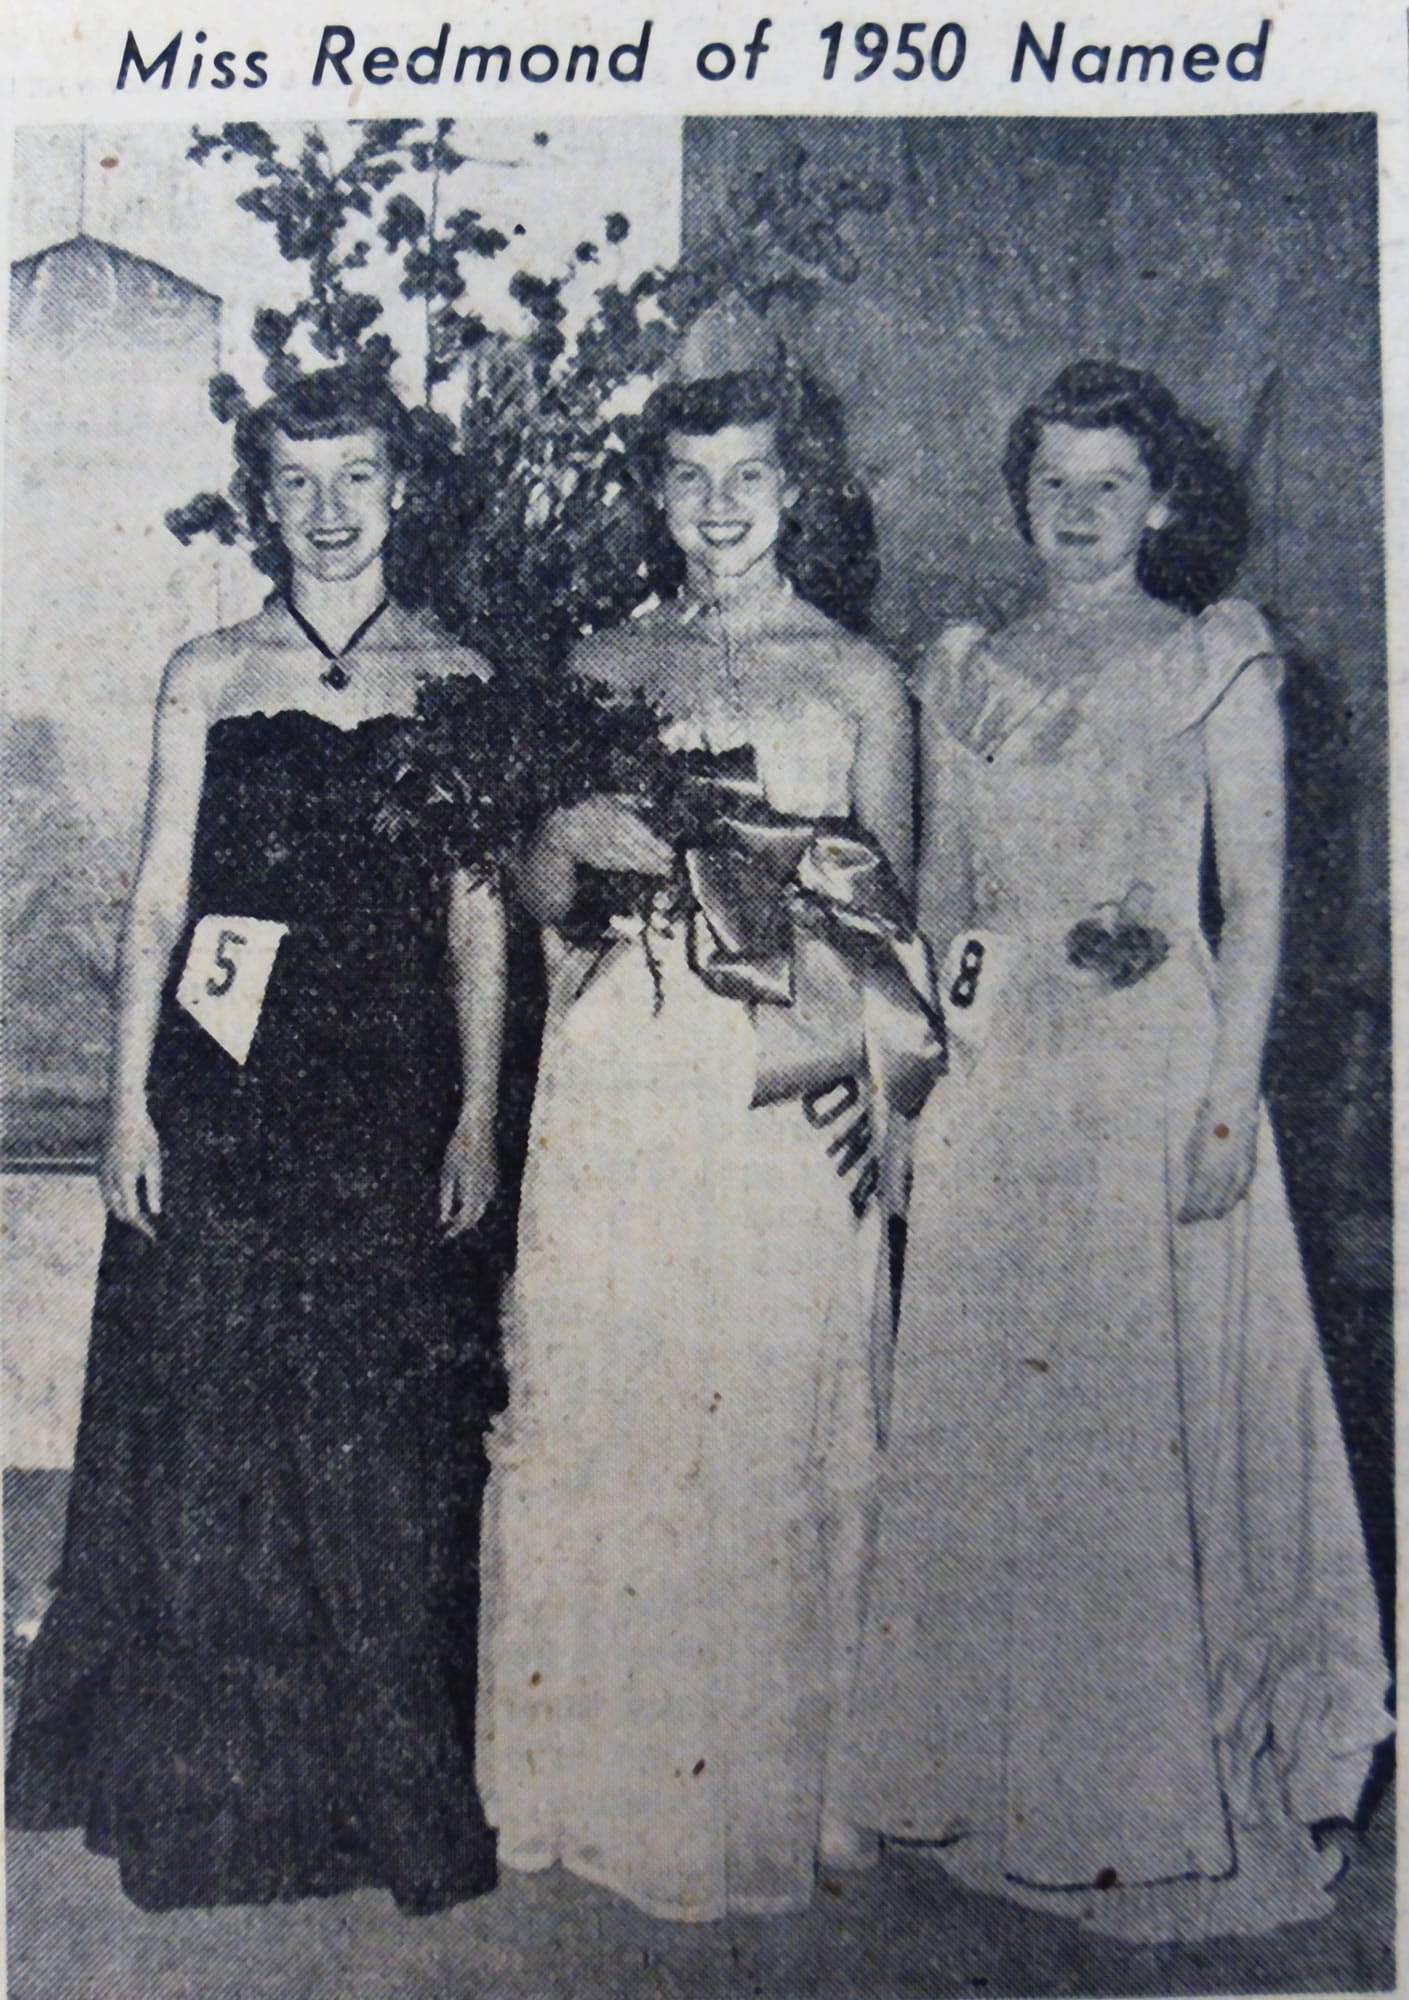 A newspaper clipping from The (Bend, Ore.) Bulletin in 1950 shows Doris Sutton, center, being crowned Miss Redmond.